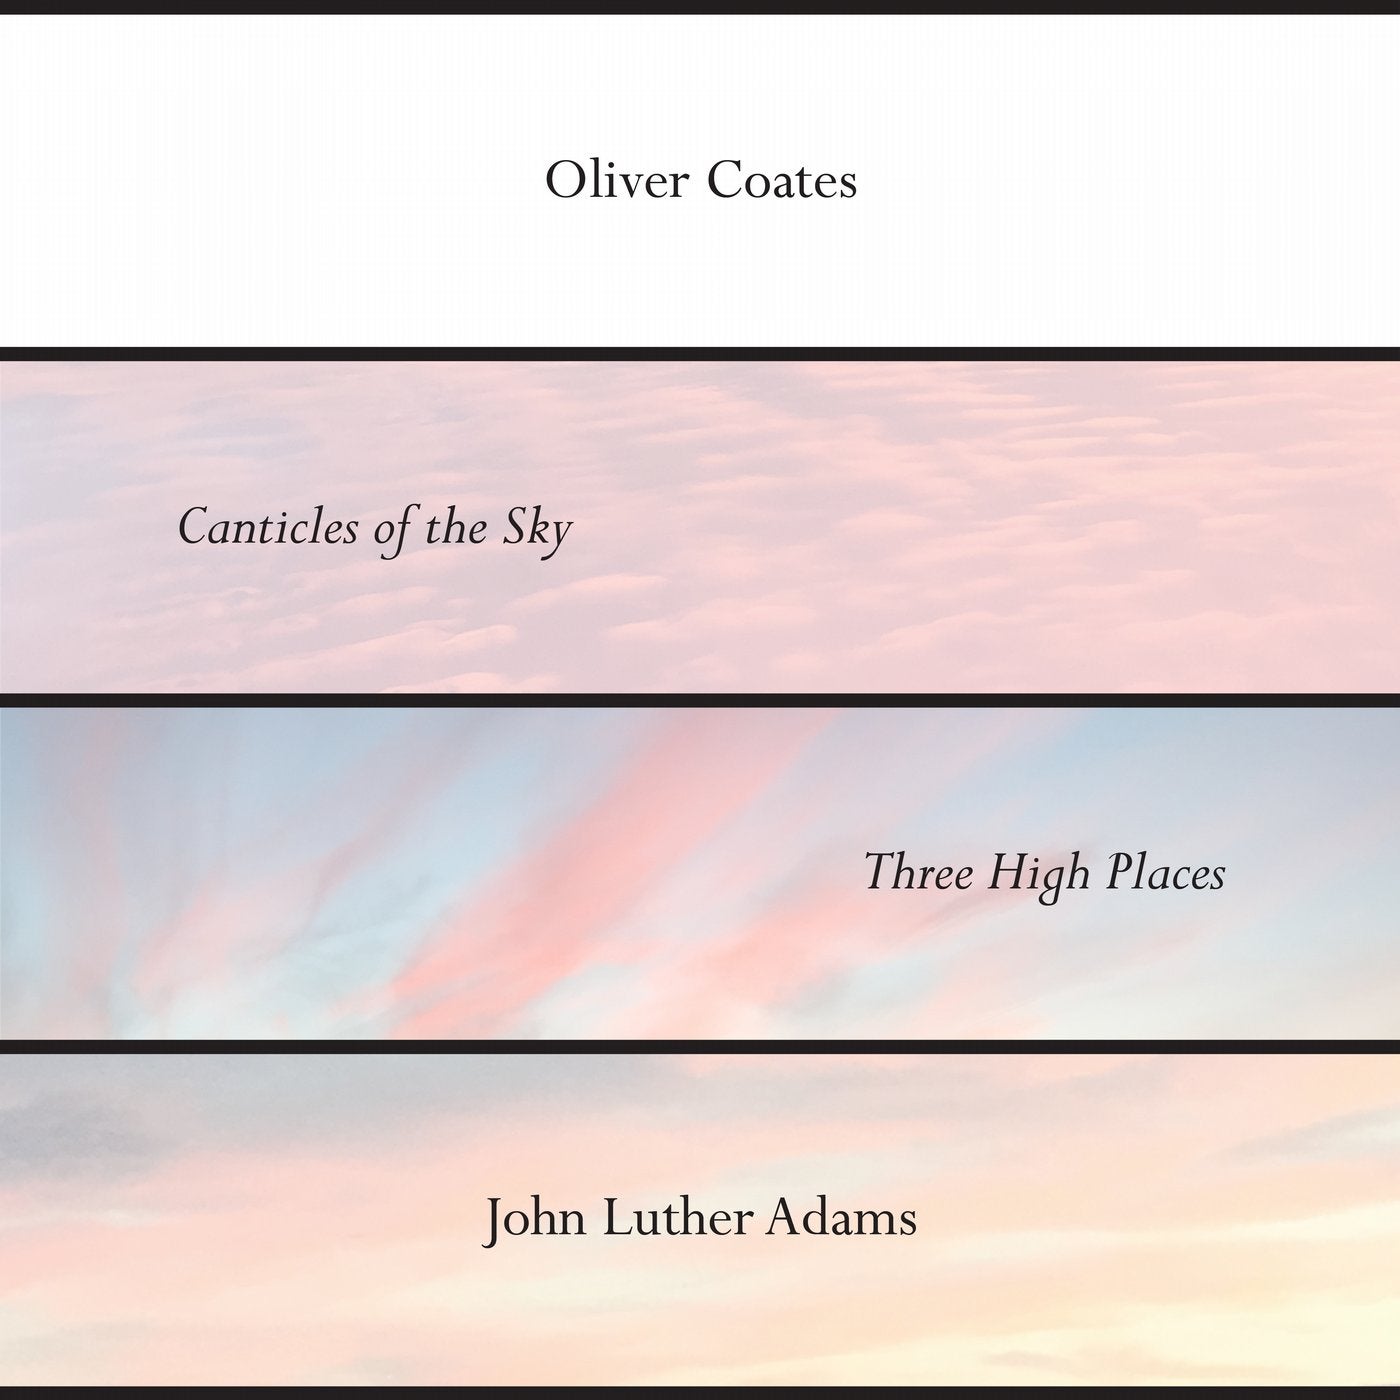 John Luther Adams' Canticles of the Sky + Three High Places